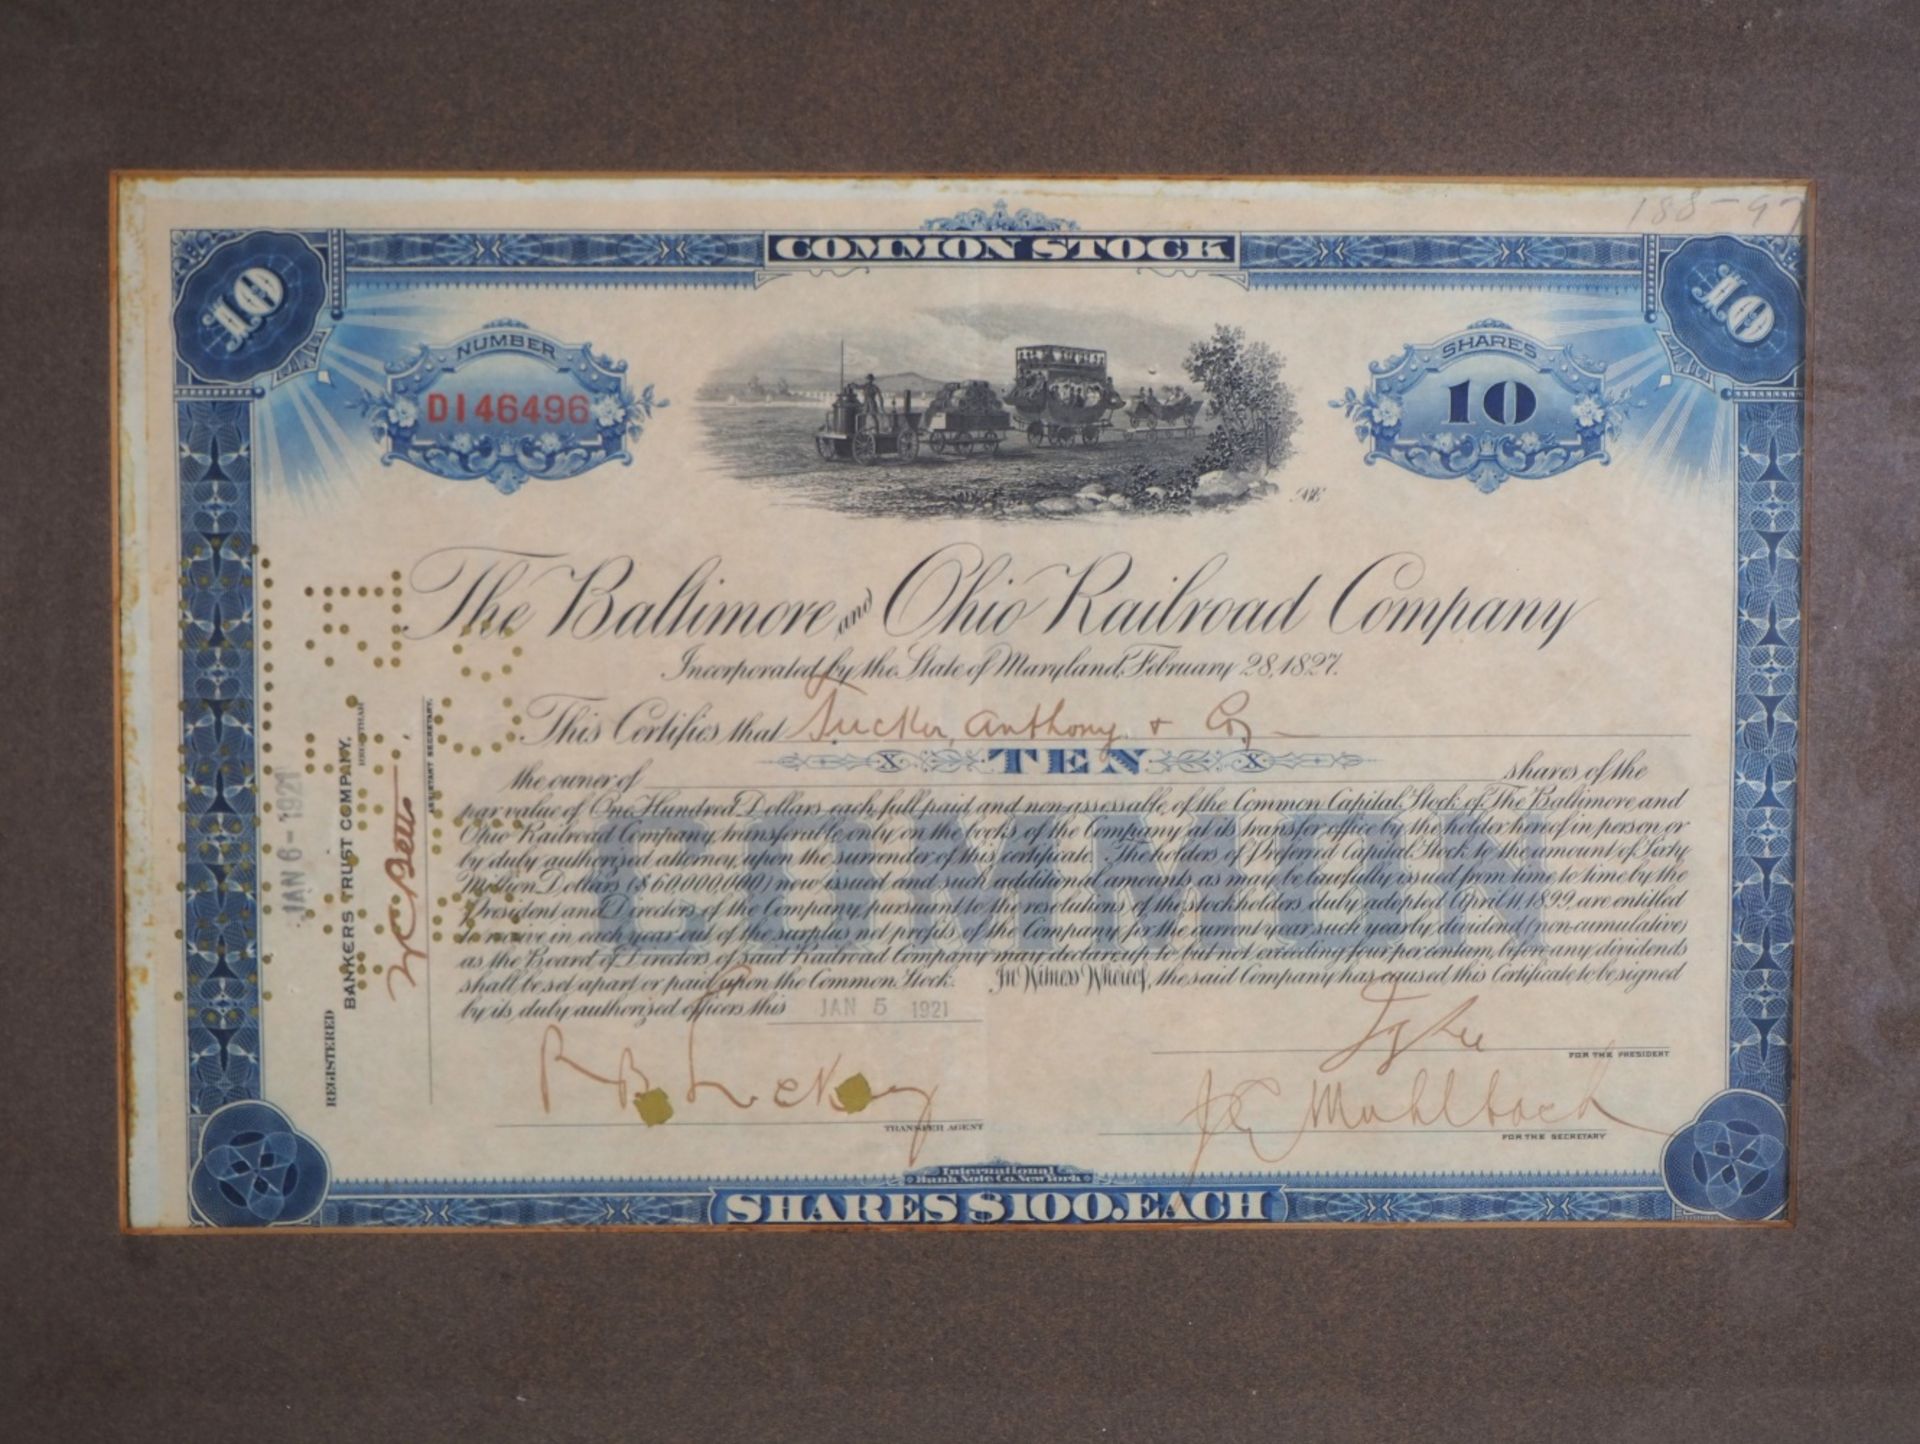 Share of the railroad company Common Stock, 1921. - Image 2 of 2